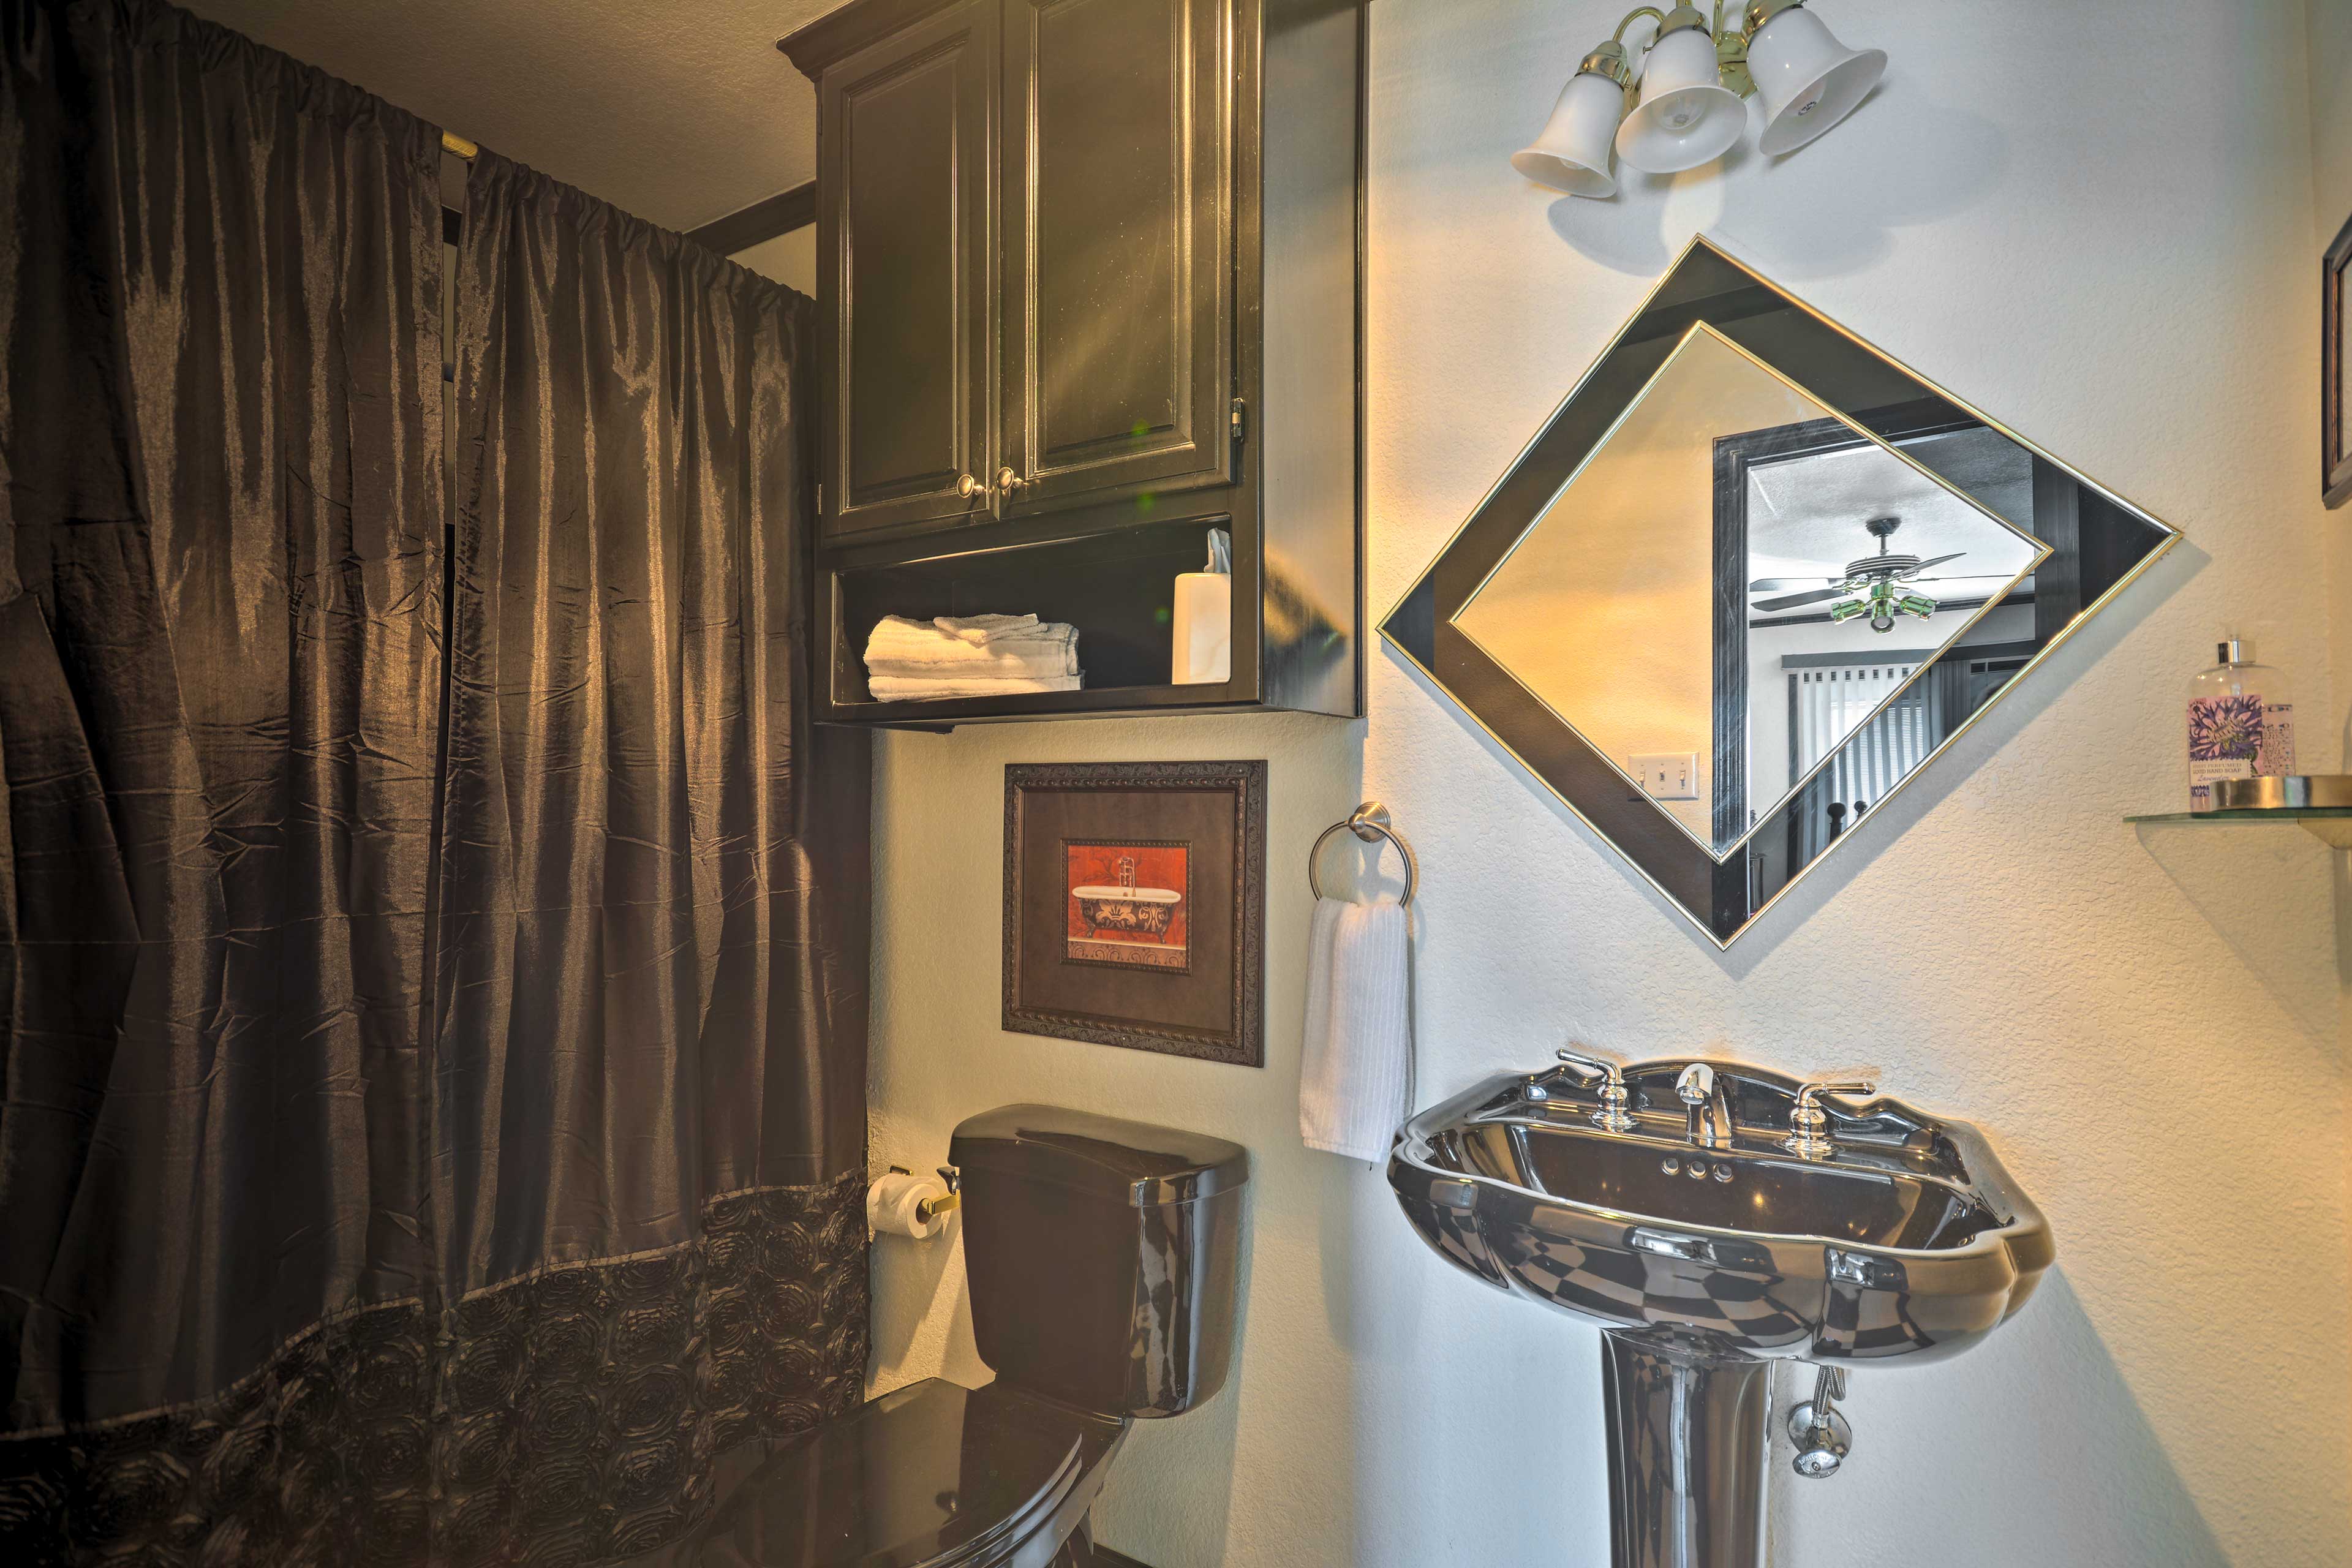 You'll love getting ready in this jazzy bathroom.